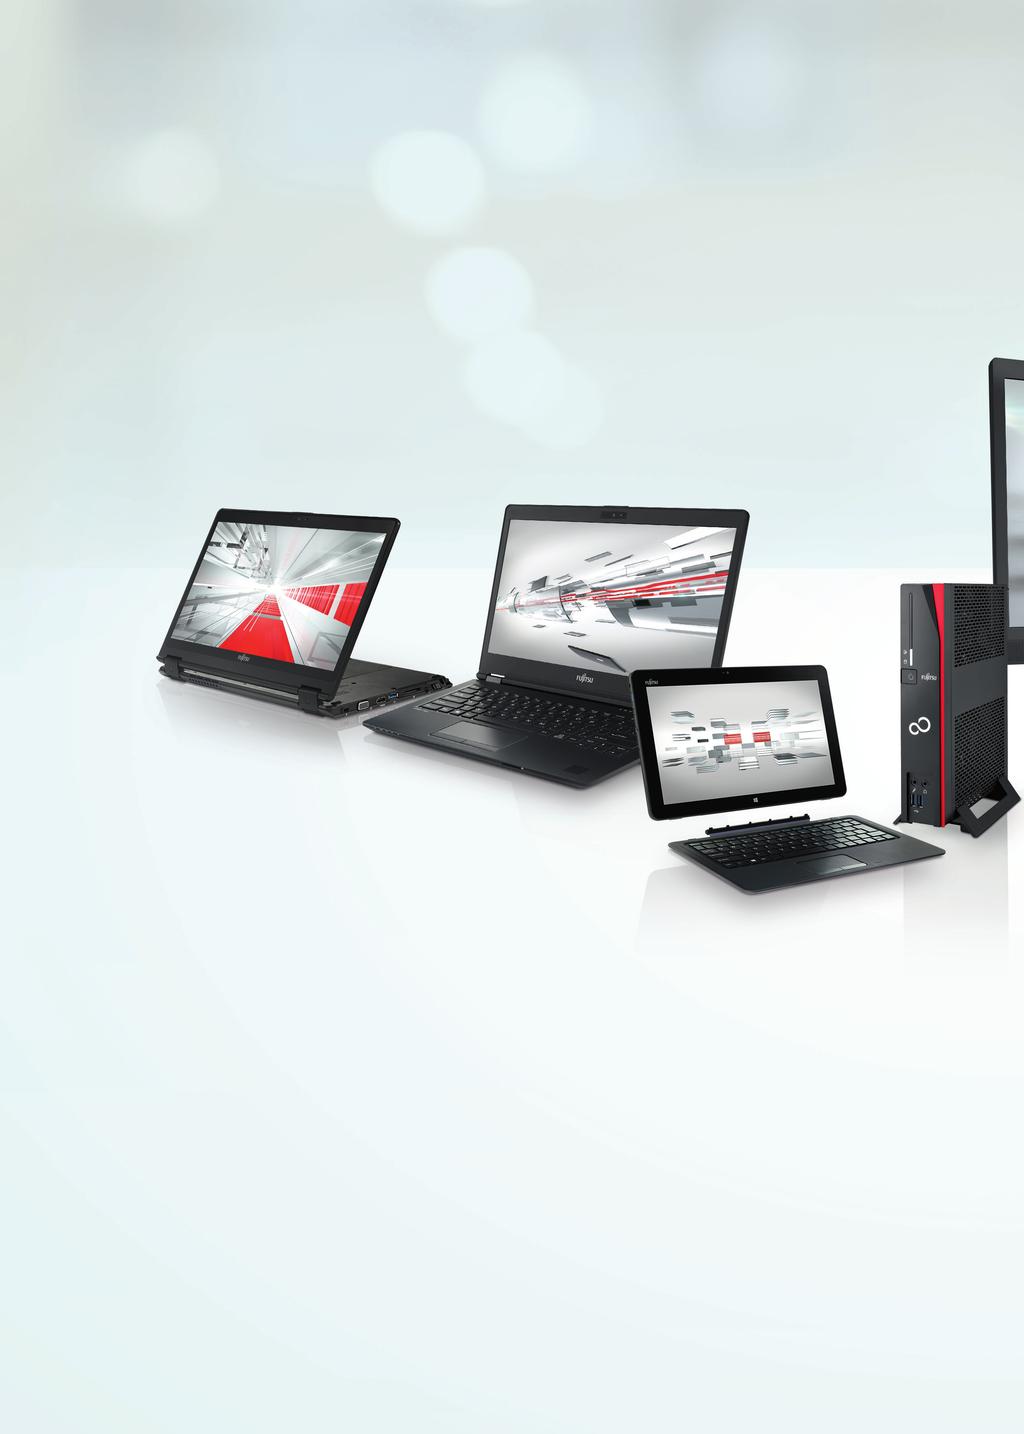 Fujitsu Client Computing Devices Whatever your role, when you choose a notebook, tablet or desk-based system by Fujitsu, you re guaranteed a device that s designed around the way you work, with a